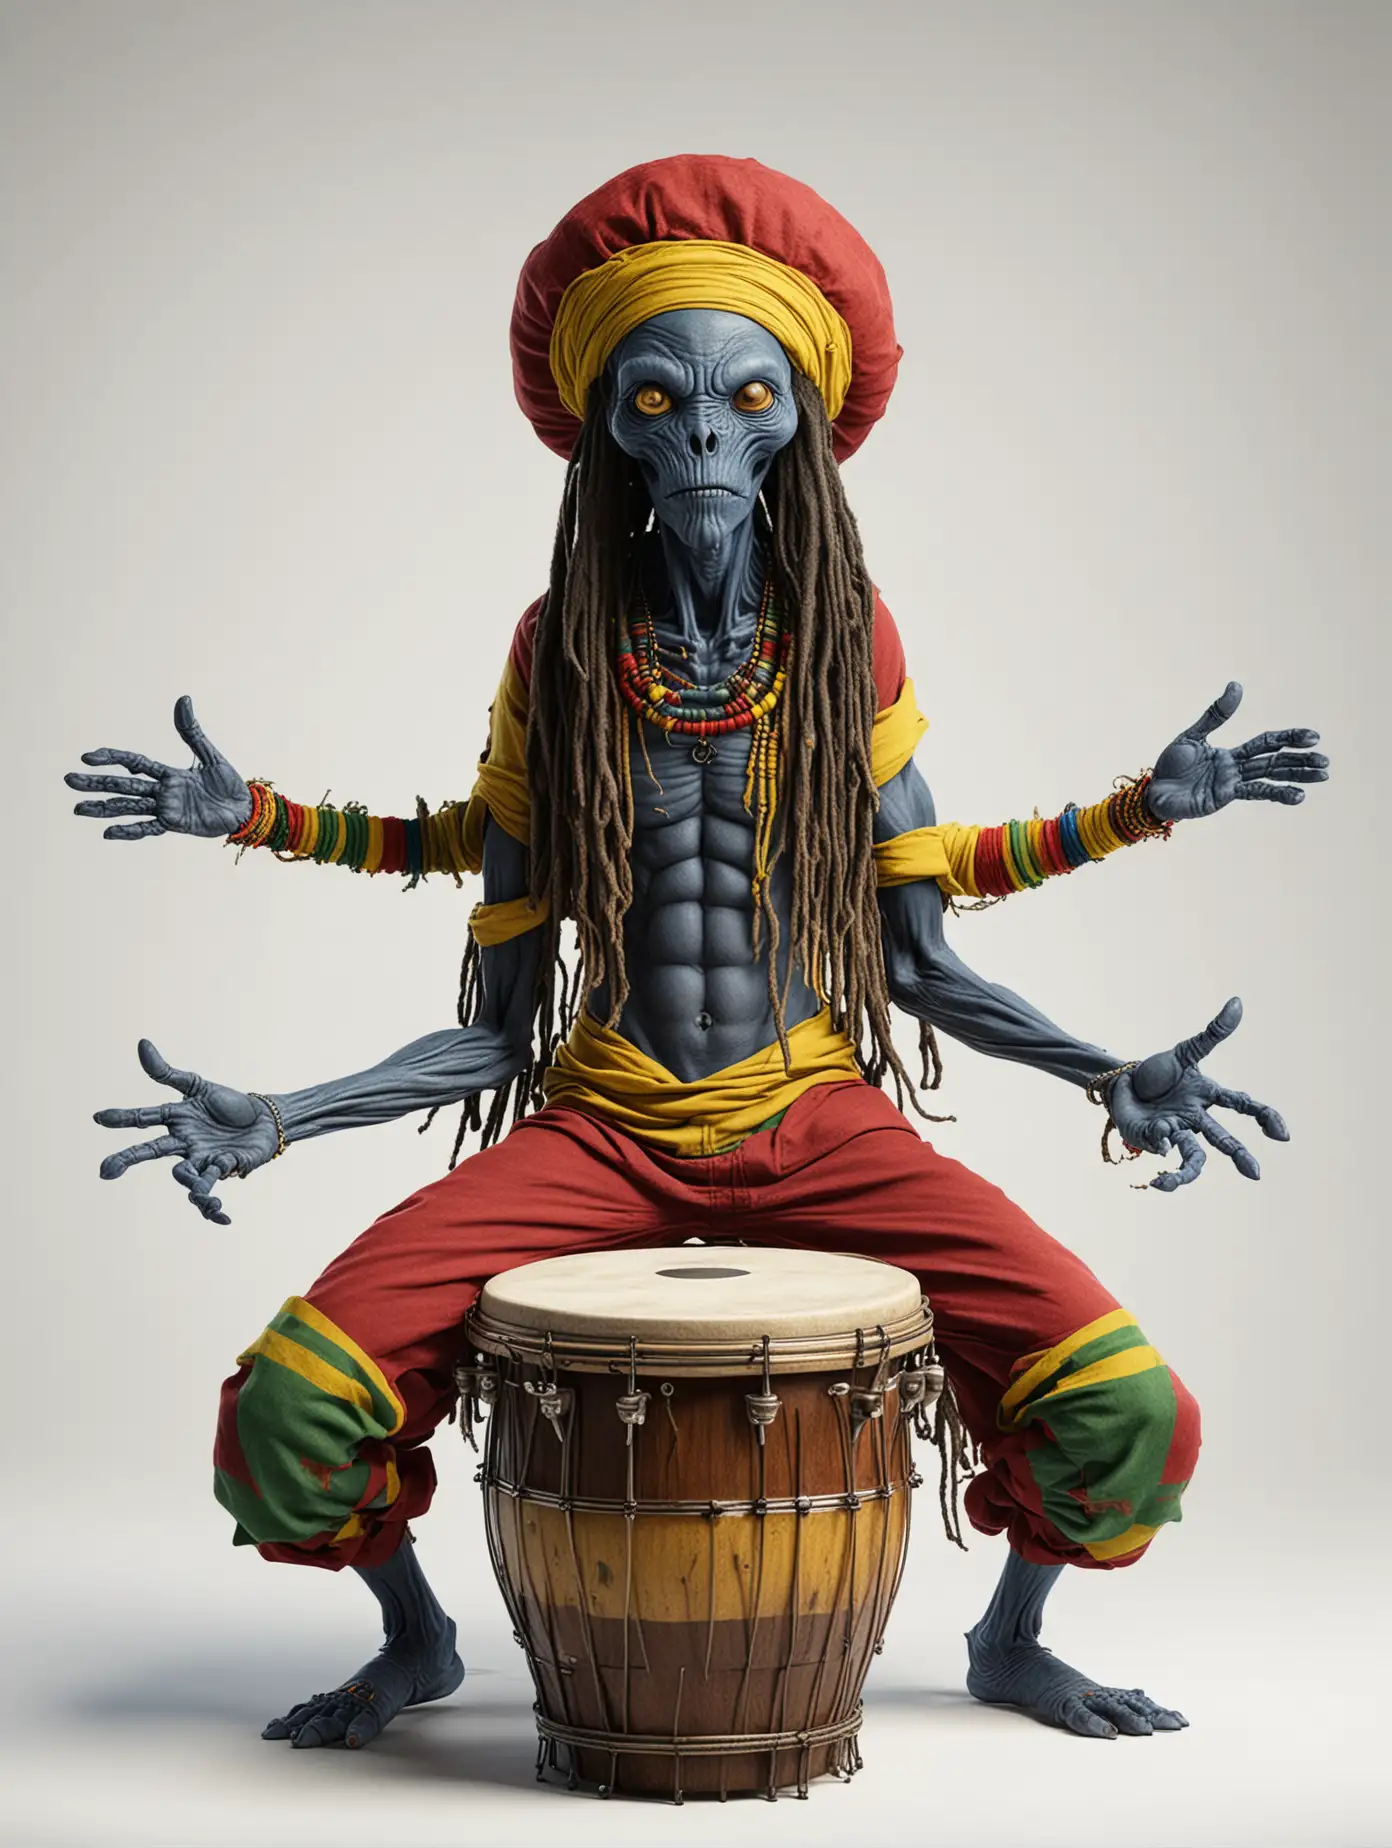 A rasta alien musician, body blue color, with eight arms, wearing colorful clothes, black, yellow, red, banging with all arms on a fantastic enormous drum-set, full figure, full view, blank white neutral background